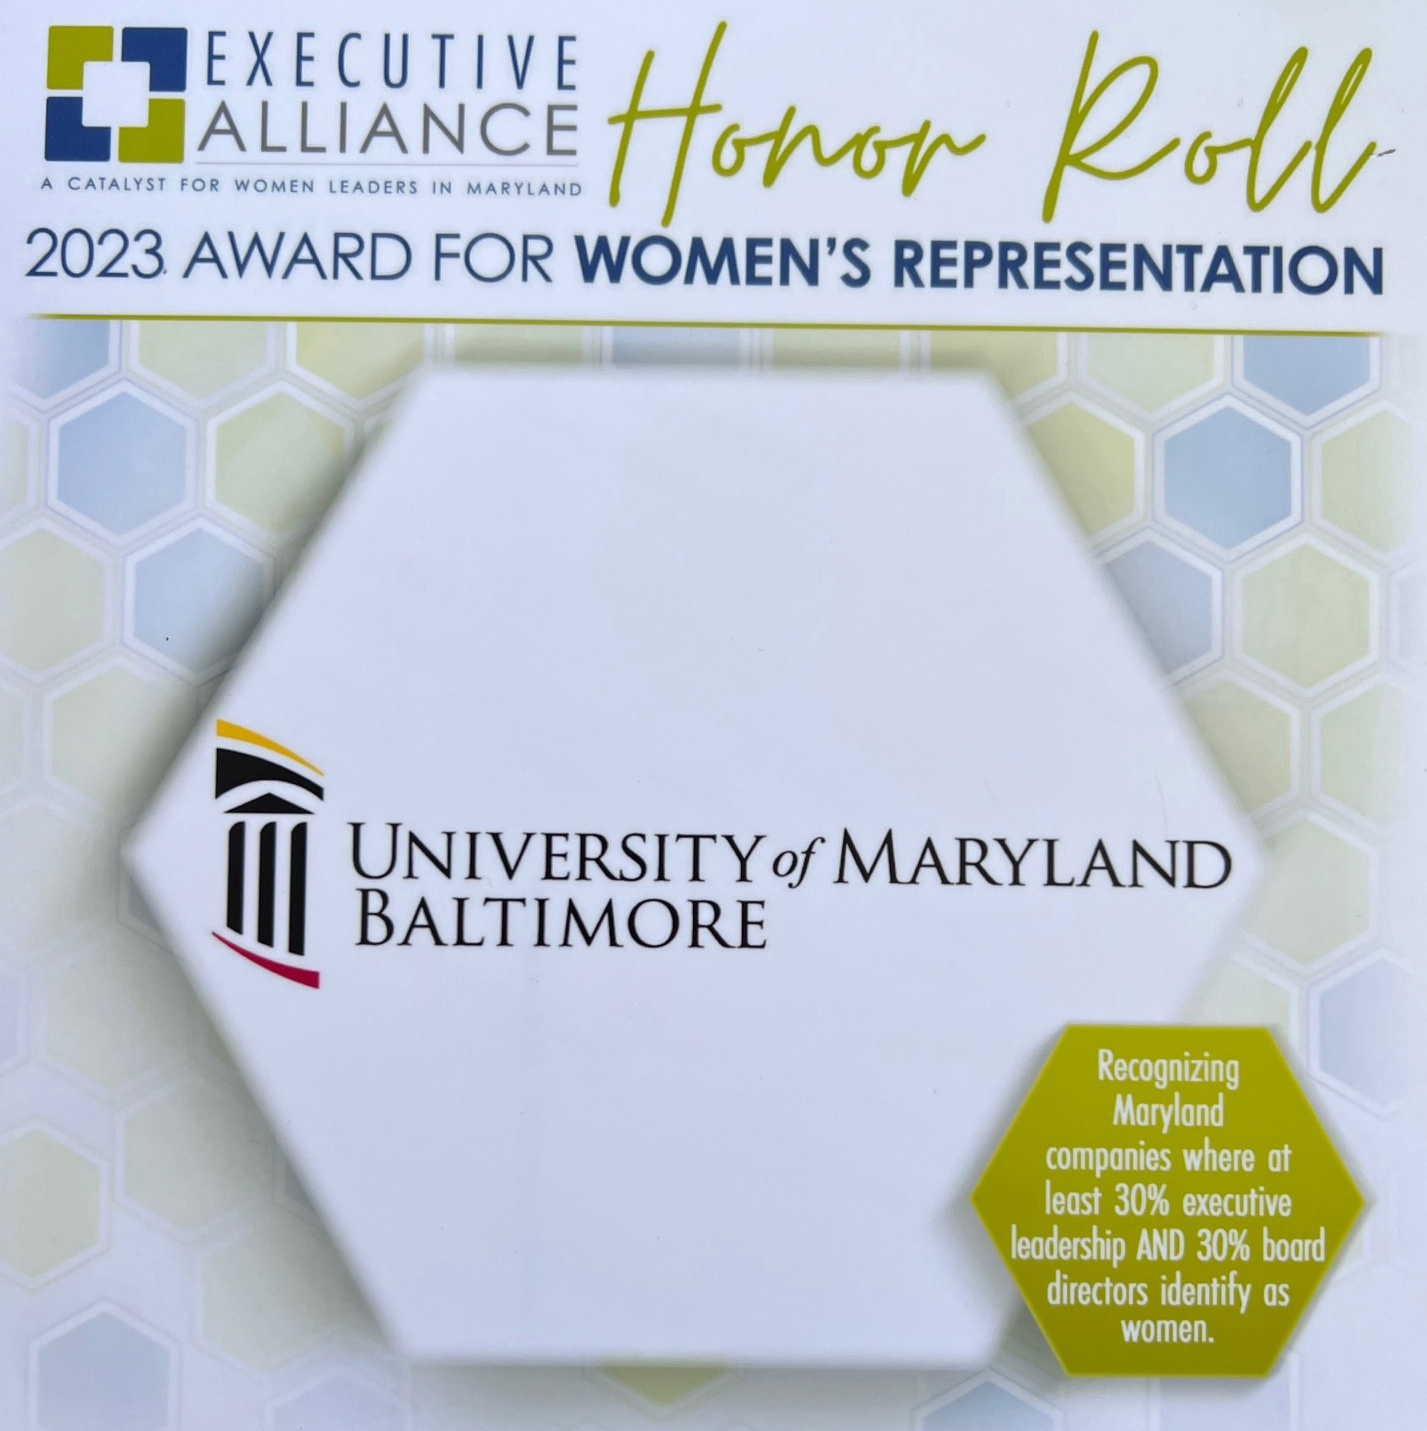 Executive Alliance Honor Roll Award for Women's Representation: University of Maryland, Baltimore